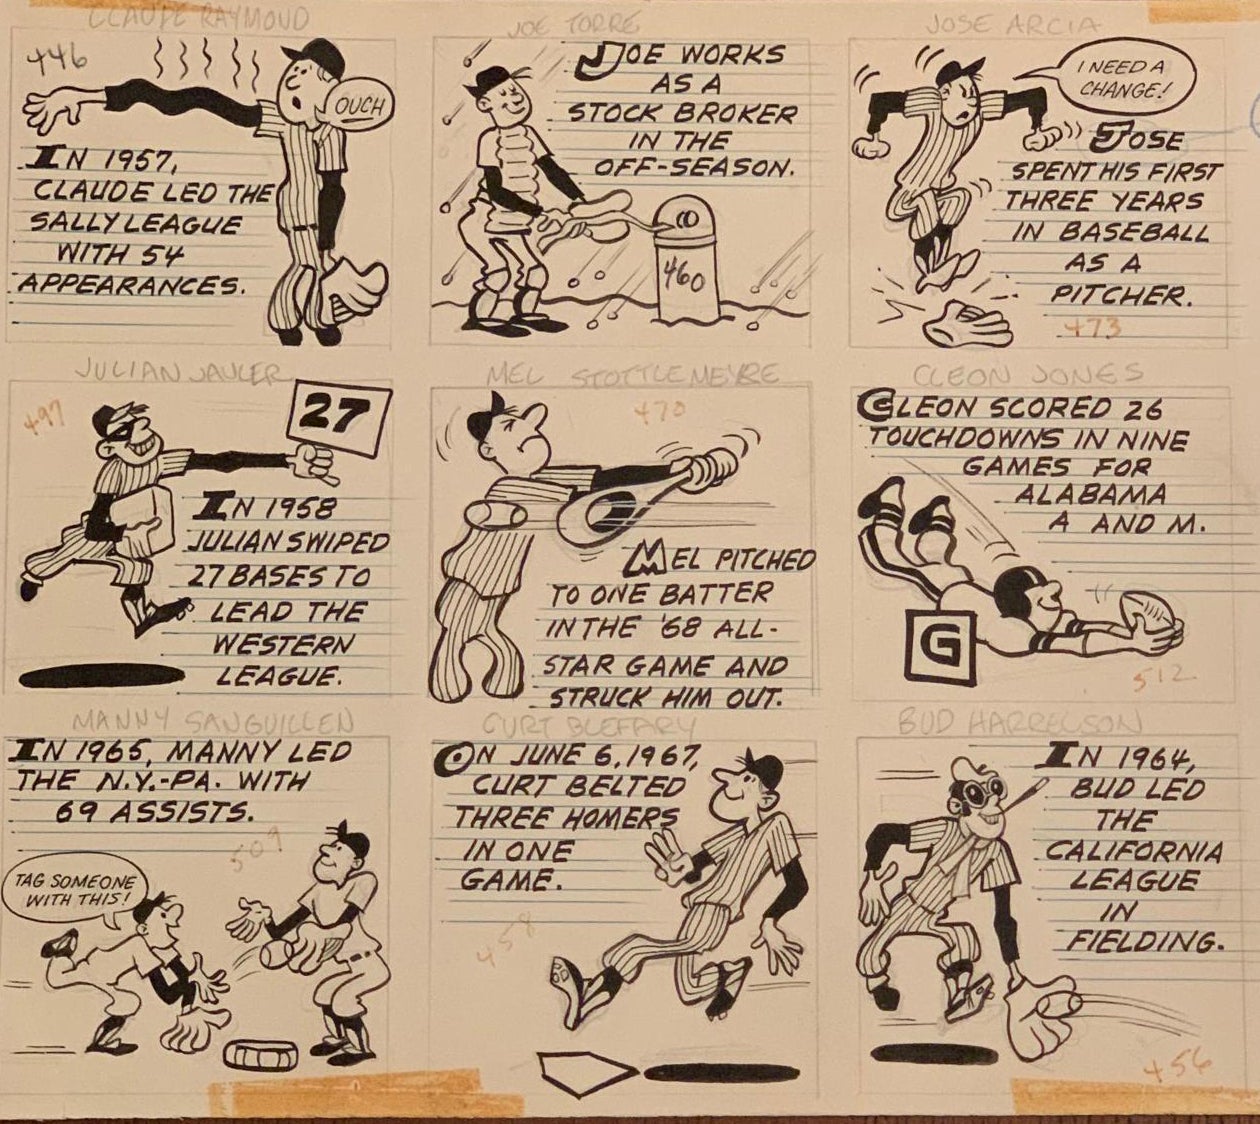 Cartoon artwork from Topps cards part of history